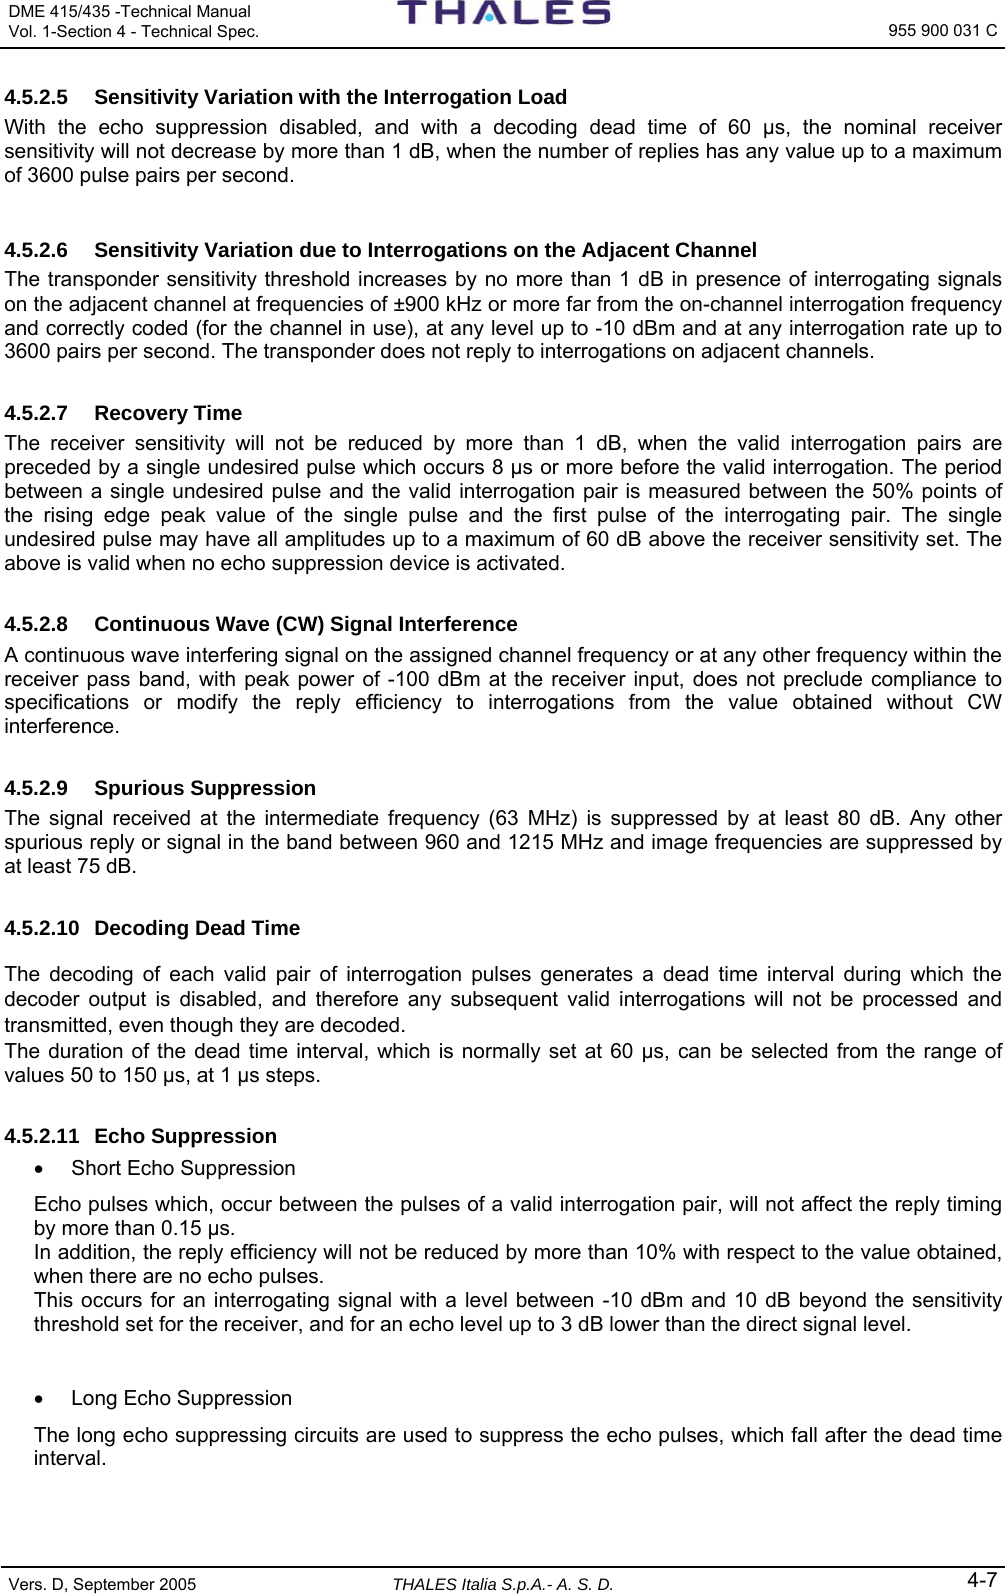 DME 415/435 -Technical Manual  Vol. 1-Section 4 - Technical Spec.   955 900 031 C Vers. D, September 2005 THALES Italia S.p.A.- A. S. D. 4-7 4.5.2.5  Sensitivity Variation with the Interrogation Load With the echo suppression disabled, and with a decoding dead time of 60 µs, the nominal receiver sensitivity will not decrease by more than 1 dB, when the number of replies has any value up to a maximum of 3600 pulse pairs per second. 4.5.2.6  Sensitivity Variation due to Interrogations on the Adjacent Channel The transponder sensitivity threshold increases by no more than 1 dB in presence of interrogating signals on the adjacent channel at frequencies of ±900 kHz or more far from the on-channel interrogation frequency and correctly coded (for the channel in use), at any level up to -10 dBm and at any interrogation rate up to 3600 pairs per second. The transponder does not reply to interrogations on adjacent channels. 4.5.2.7 Recovery Time The receiver sensitivity will not be reduced by more than 1 dB, when the valid interrogation pairs are preceded by a single undesired pulse which occurs 8 µs or more before the valid interrogation. The period between a single undesired pulse and the valid interrogation pair is measured between the 50% points of the rising edge peak value of the single pulse and the first pulse of the interrogating pair. The single undesired pulse may have all amplitudes up to a maximum of 60 dB above the receiver sensitivity set. The above is valid when no echo suppression device is activated. 4.5.2.8  Continuous Wave (CW) Signal Interference A continuous wave interfering signal on the assigned channel frequency or at any other frequency within the receiver pass band, with peak power of -100 dBm at the receiver input, does not preclude compliance to specifications or modify the reply efficiency to interrogations from the value obtained without CW interference. 4.5.2.9 Spurious Suppression The signal received at the intermediate frequency (63 MHz) is suppressed by at least 80 dB. Any other spurious reply or signal in the band between 960 and 1215 MHz and image frequencies are suppressed by at least 75 dB. 4.5.2.10  Decoding Dead Time The decoding of each valid pair of interrogation pulses generates a dead time interval during which the decoder output is disabled, and therefore any subsequent valid interrogations will not be processed and transmitted, even though they are decoded. The duration of the dead time interval, which is normally set at 60 µs, can be selected from the range of values 50 to 150 µs, at 1 µs steps. 4.5.2.11 Echo Suppression •  Short Echo Suppression Echo pulses which, occur between the pulses of a valid interrogation pair, will not affect the reply timing by more than 0.15 µs. In addition, the reply efficiency will not be reduced by more than 10% with respect to the value obtained, when there are no echo pulses.  This occurs for an interrogating signal with a level between -10 dBm and 10 dB beyond the sensitivity threshold set for the receiver, and for an echo level up to 3 dB lower than the direct signal level.  •  Long Echo Suppression The long echo suppressing circuits are used to suppress the echo pulses, which fall after the dead time interval. 